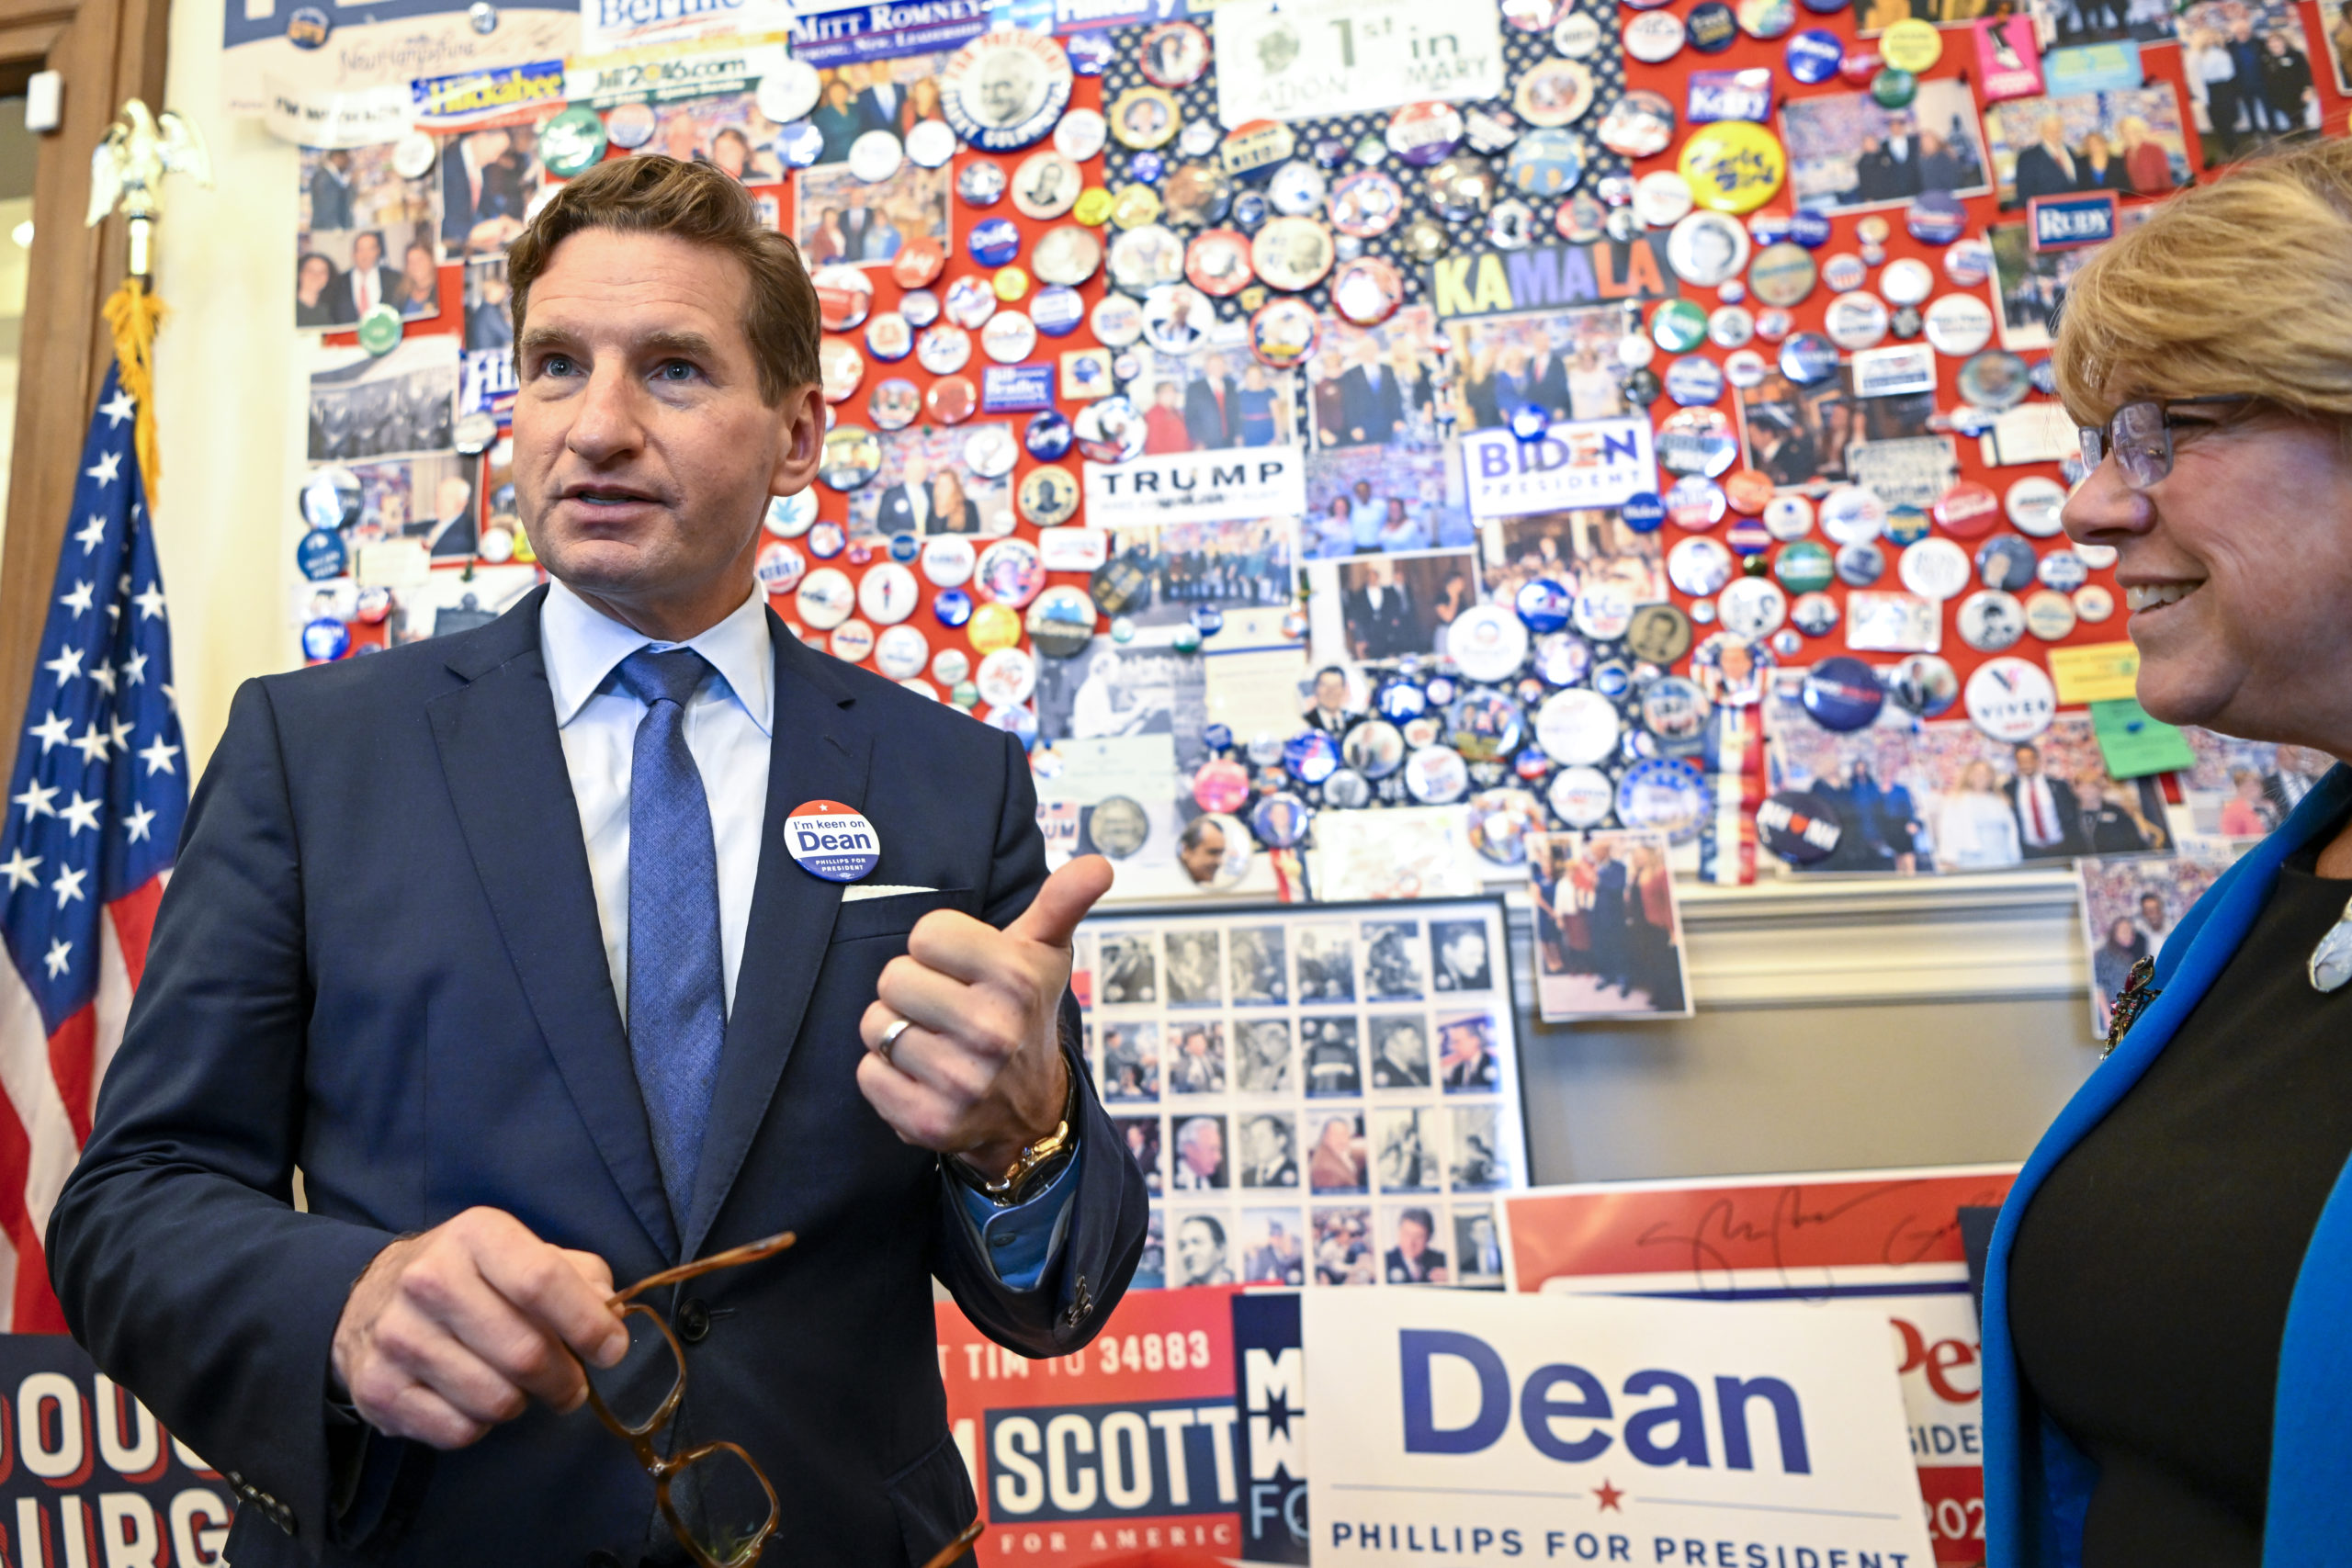 CONCORD, NEW HAMPSHIRE - OCTOBER 27: U.S. Rep. Dean Phillips (D-MN)(R) visits the candidate wall at the N.H. Statehouse after handing over his declaration of candidacy form for President to the New Hampshire Secretary of State David Scanlan, on October 27, 2023 in Concord, New Hampshire. While touting the accomplishments of President Biden, Rep. Phillips believes that new democratic leadership is needed and has joined the 2024 presidential race. (Photo by Gaelen Morse/Getty Images)